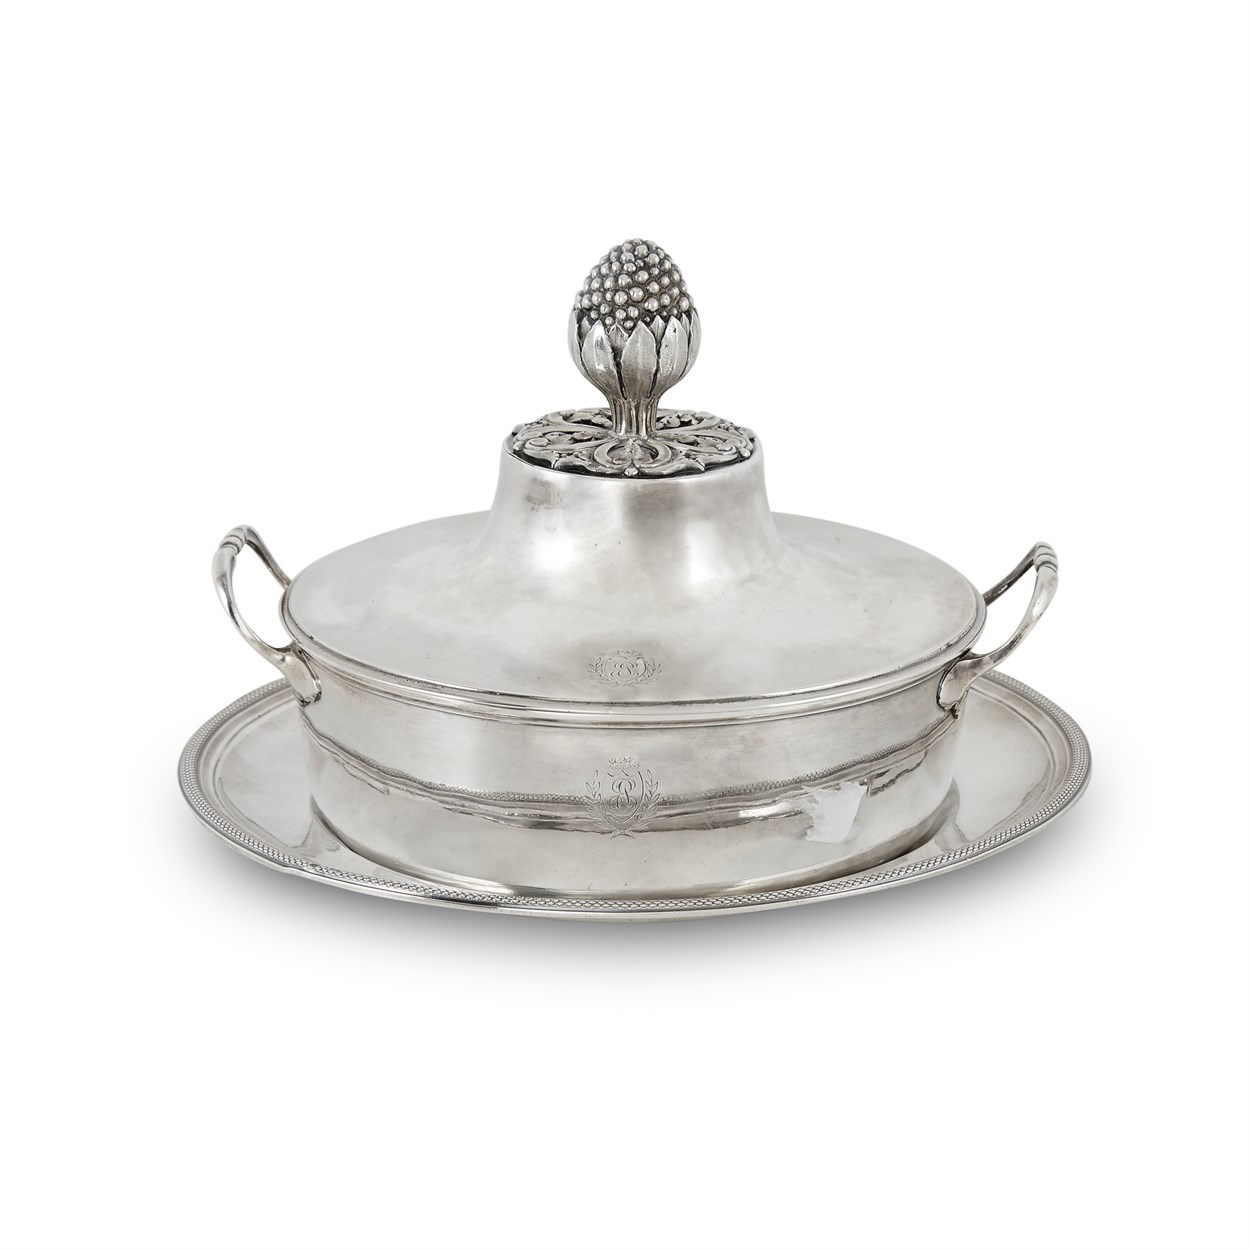 Lot 91 - A Directoire silver two-handled covered serving dish and stand